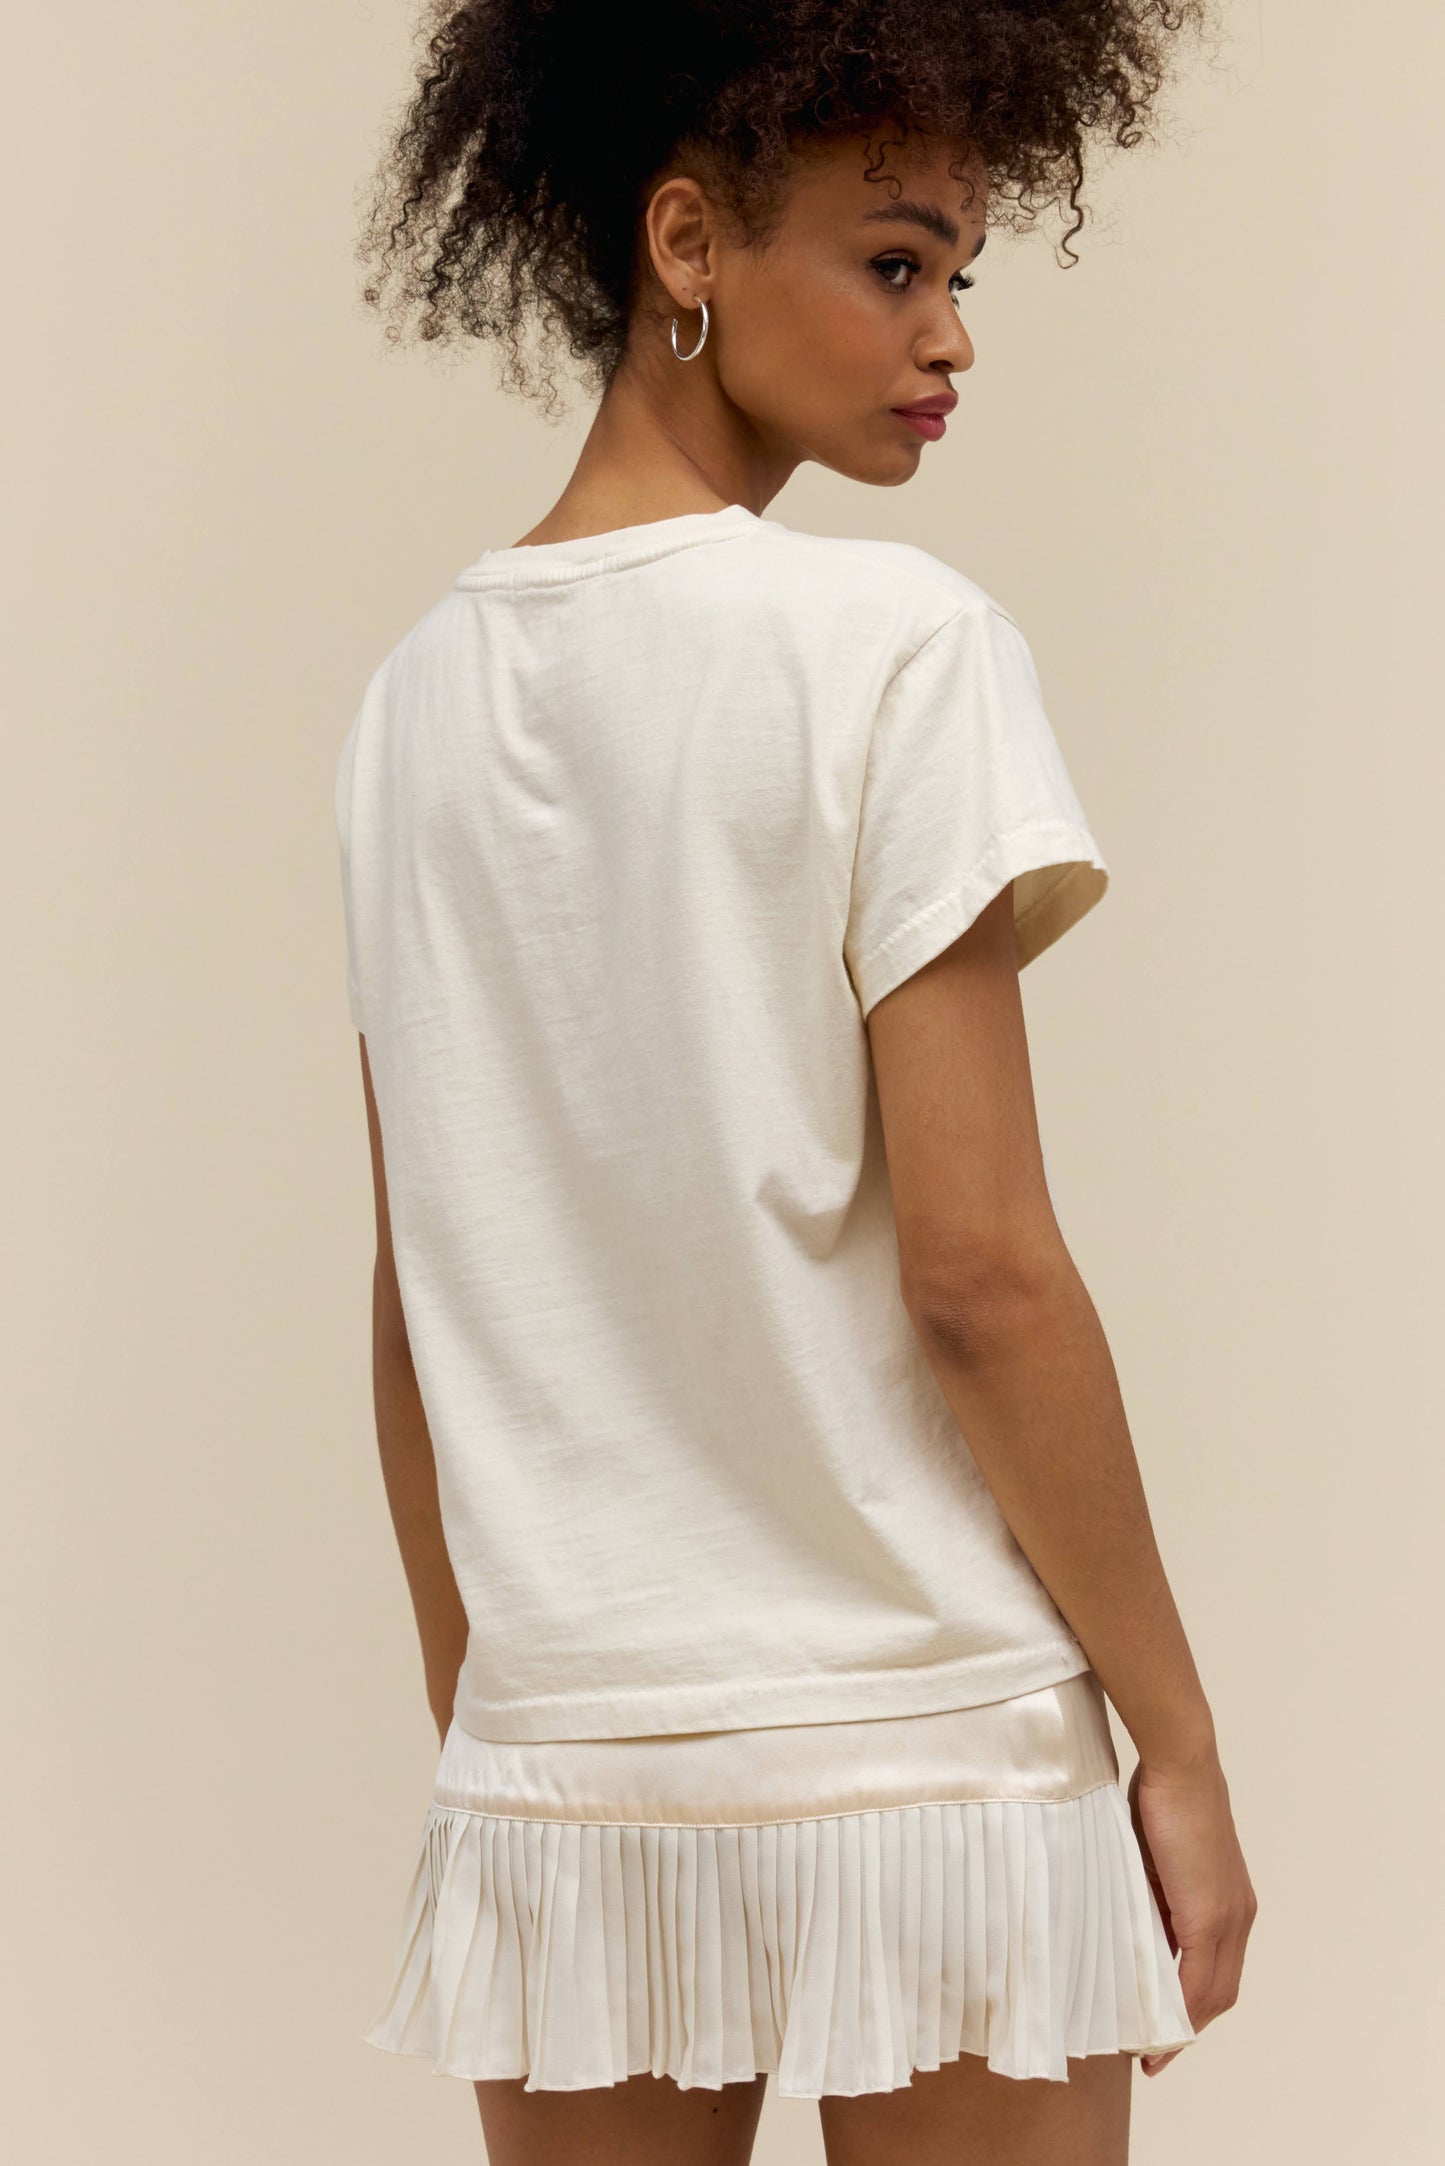 A model featuring a white tee stamped with 'Neil Young' and a graphic of a beach.